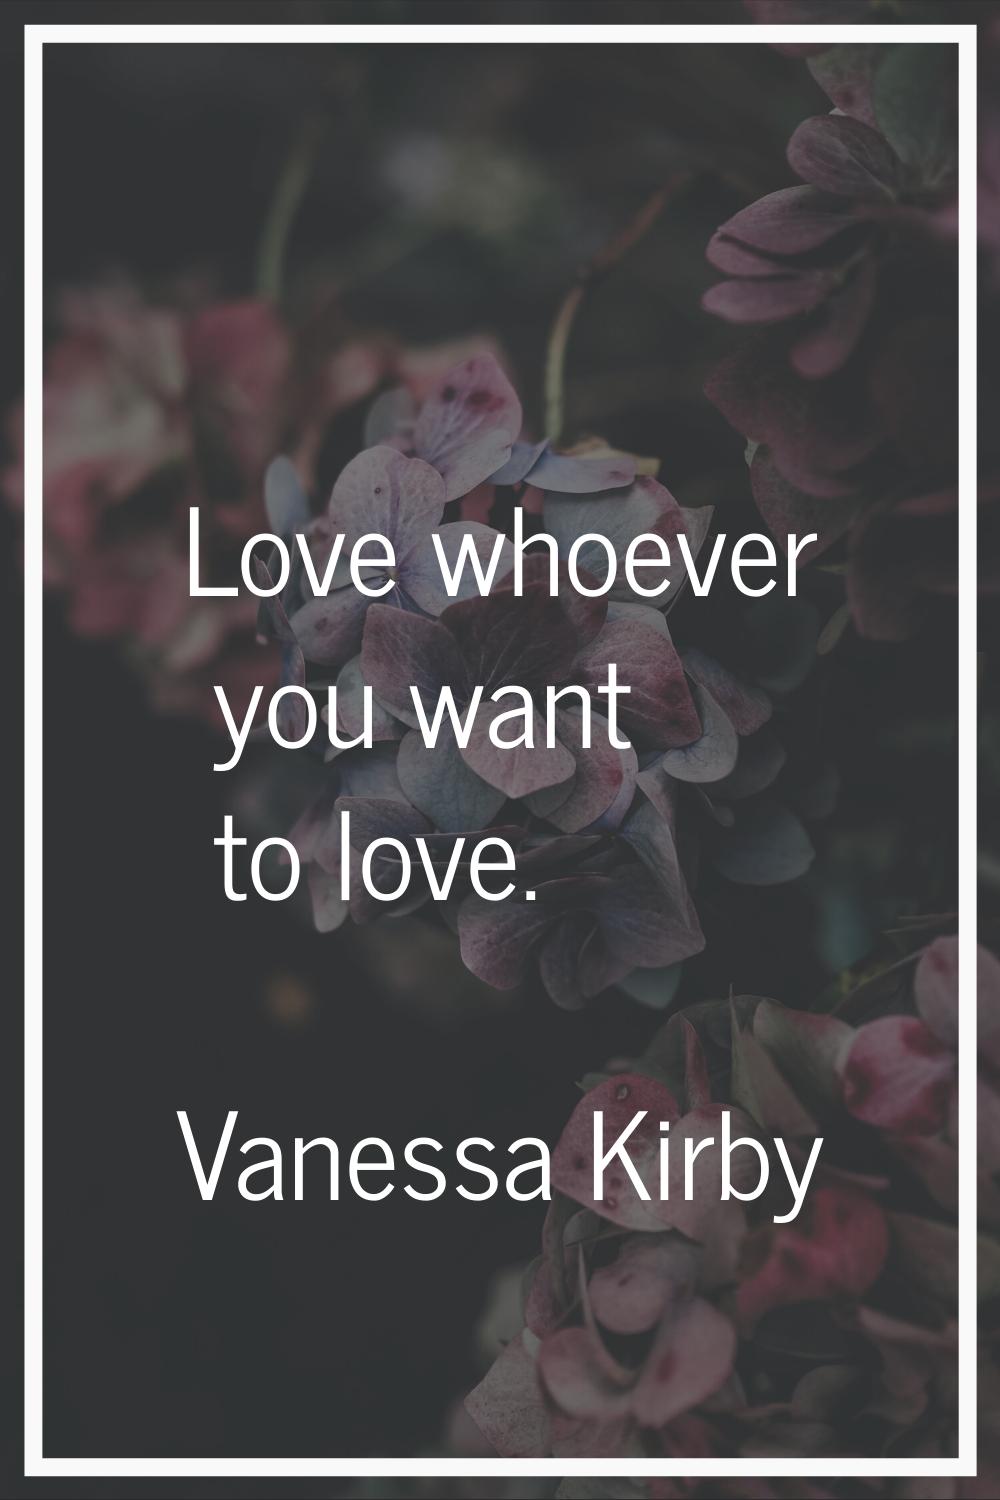 Love whoever you want to love.